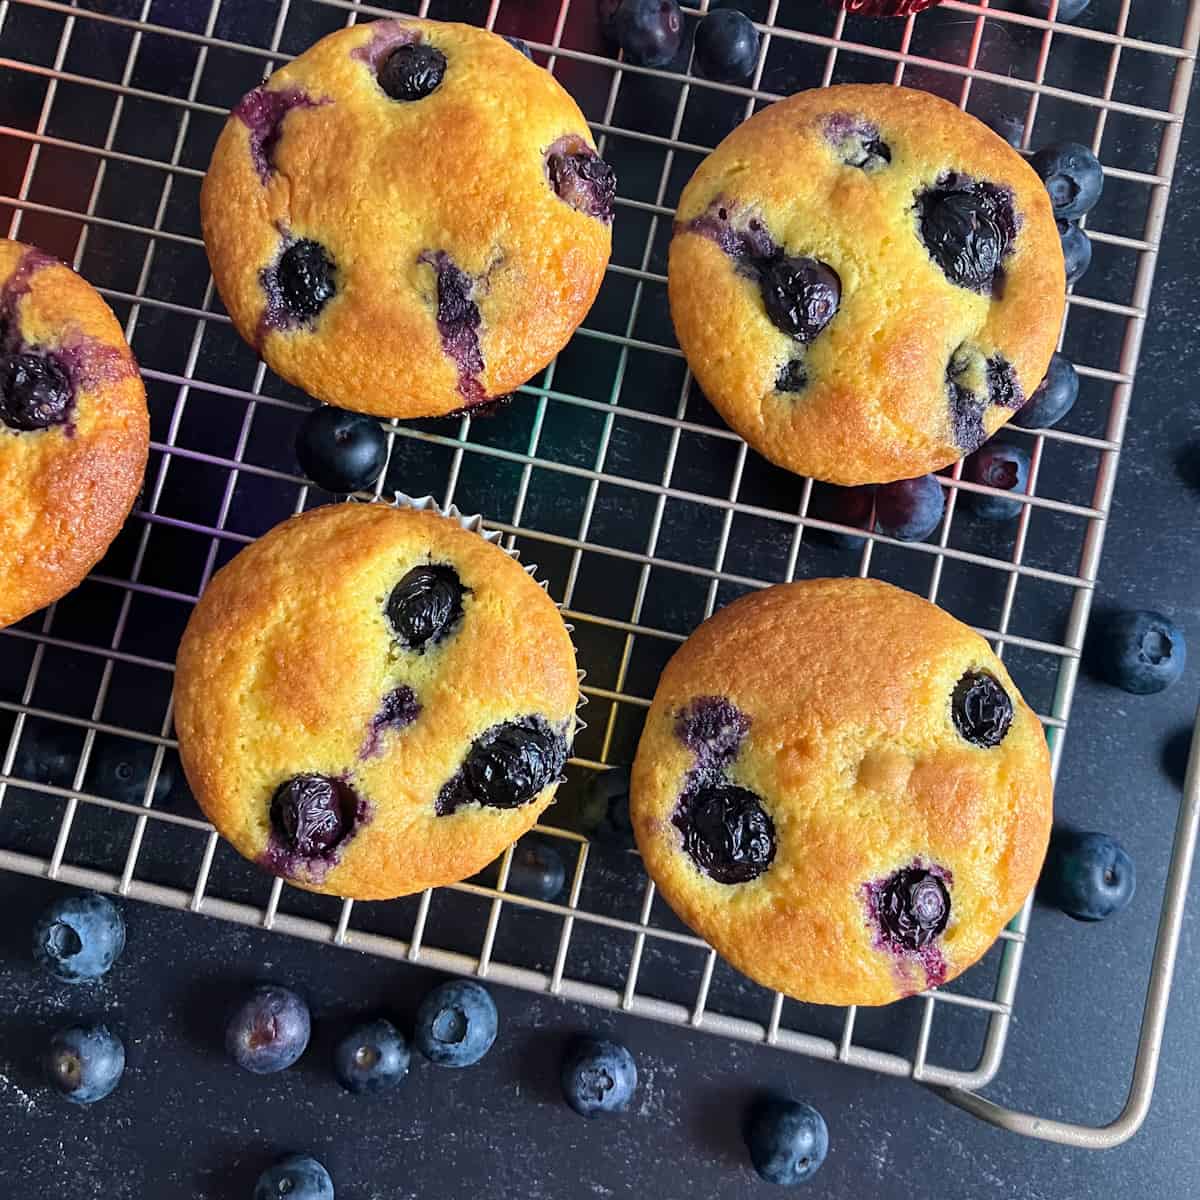 How To Use An Electric Muffin Maker: A Step-by-Step Guide